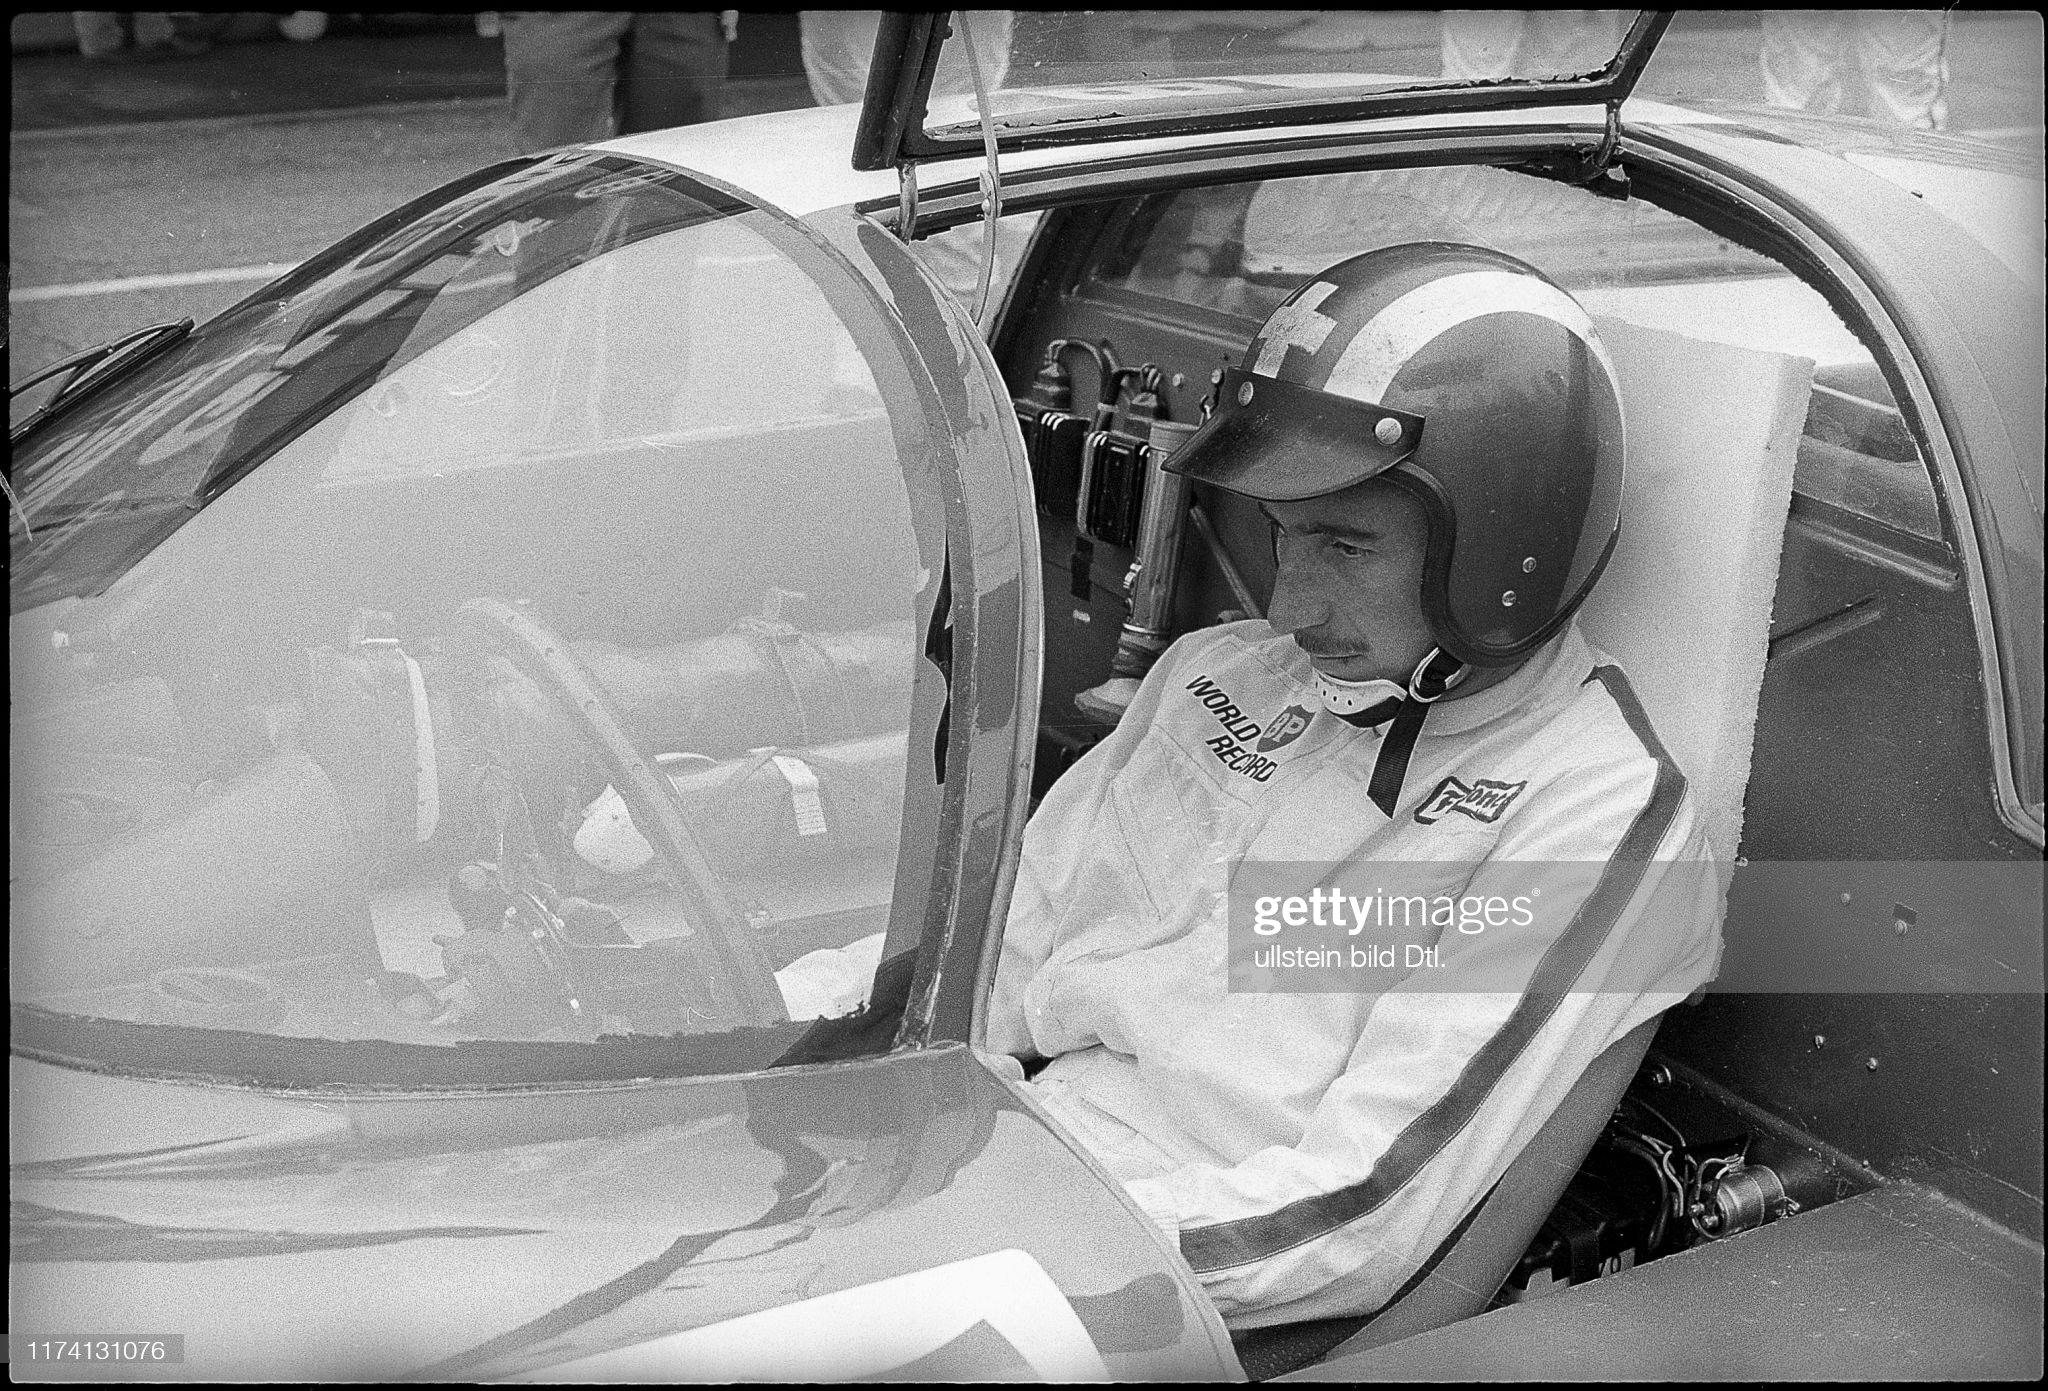 Jo Siffert sitting in a Porsche 906 setting a world record in Monza on October 29, 1967.